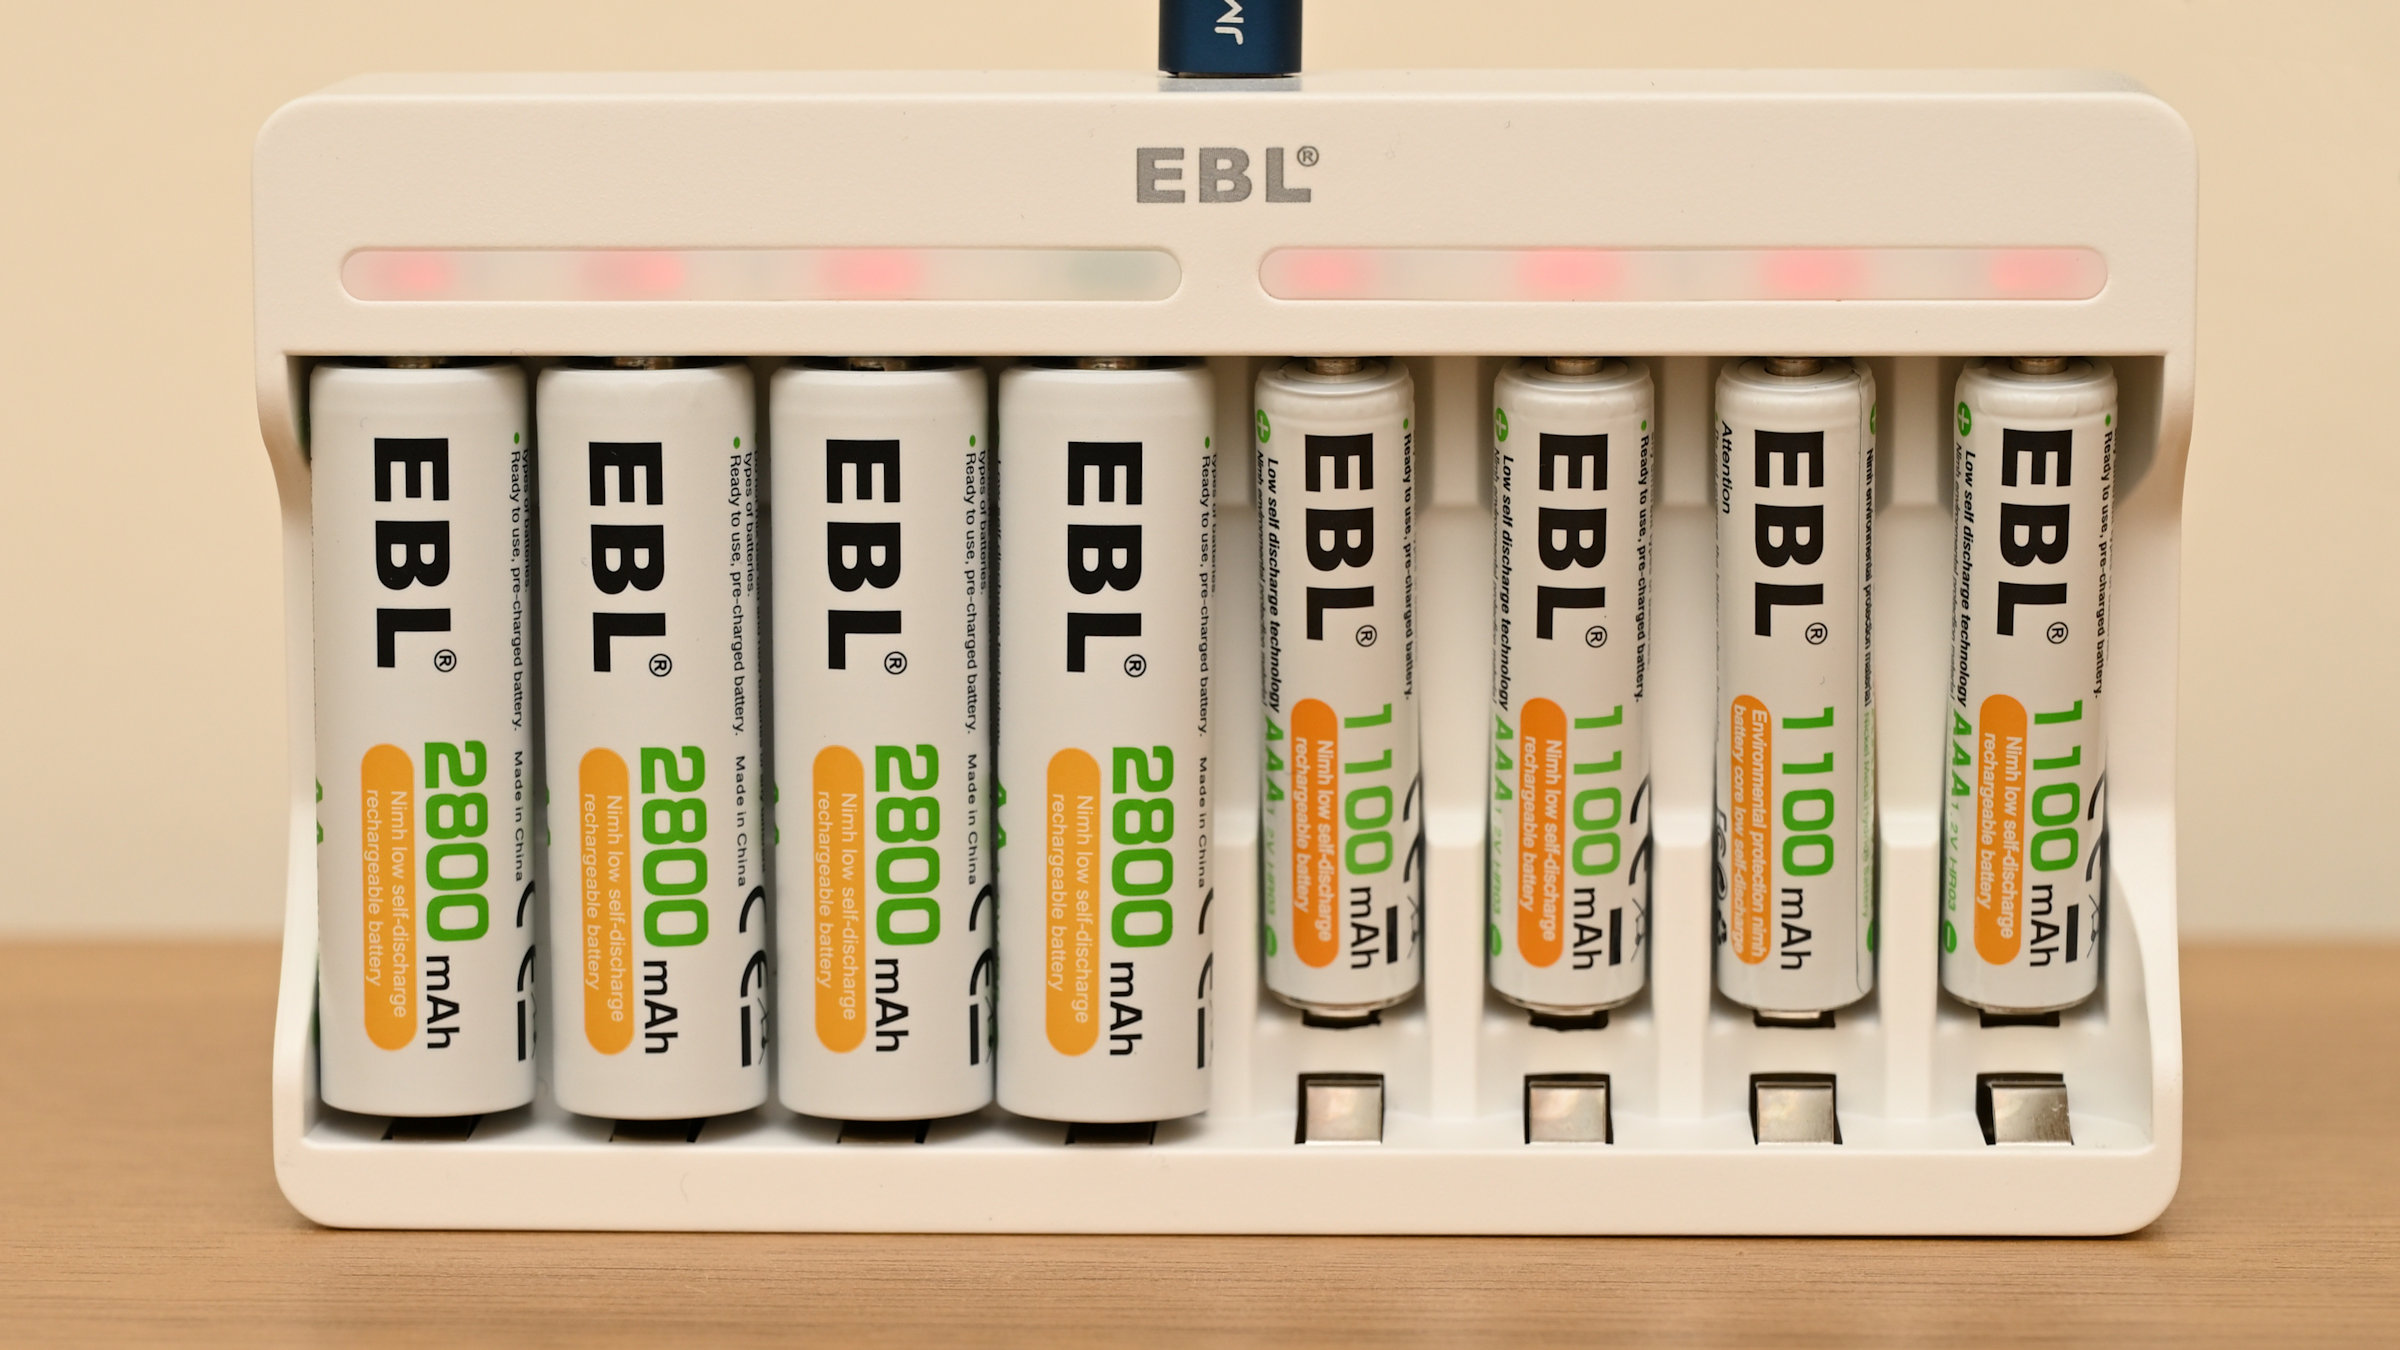 EBL AA 2800mAh High Performance Ni-MH Rechargeable Batteries, 4 Pack